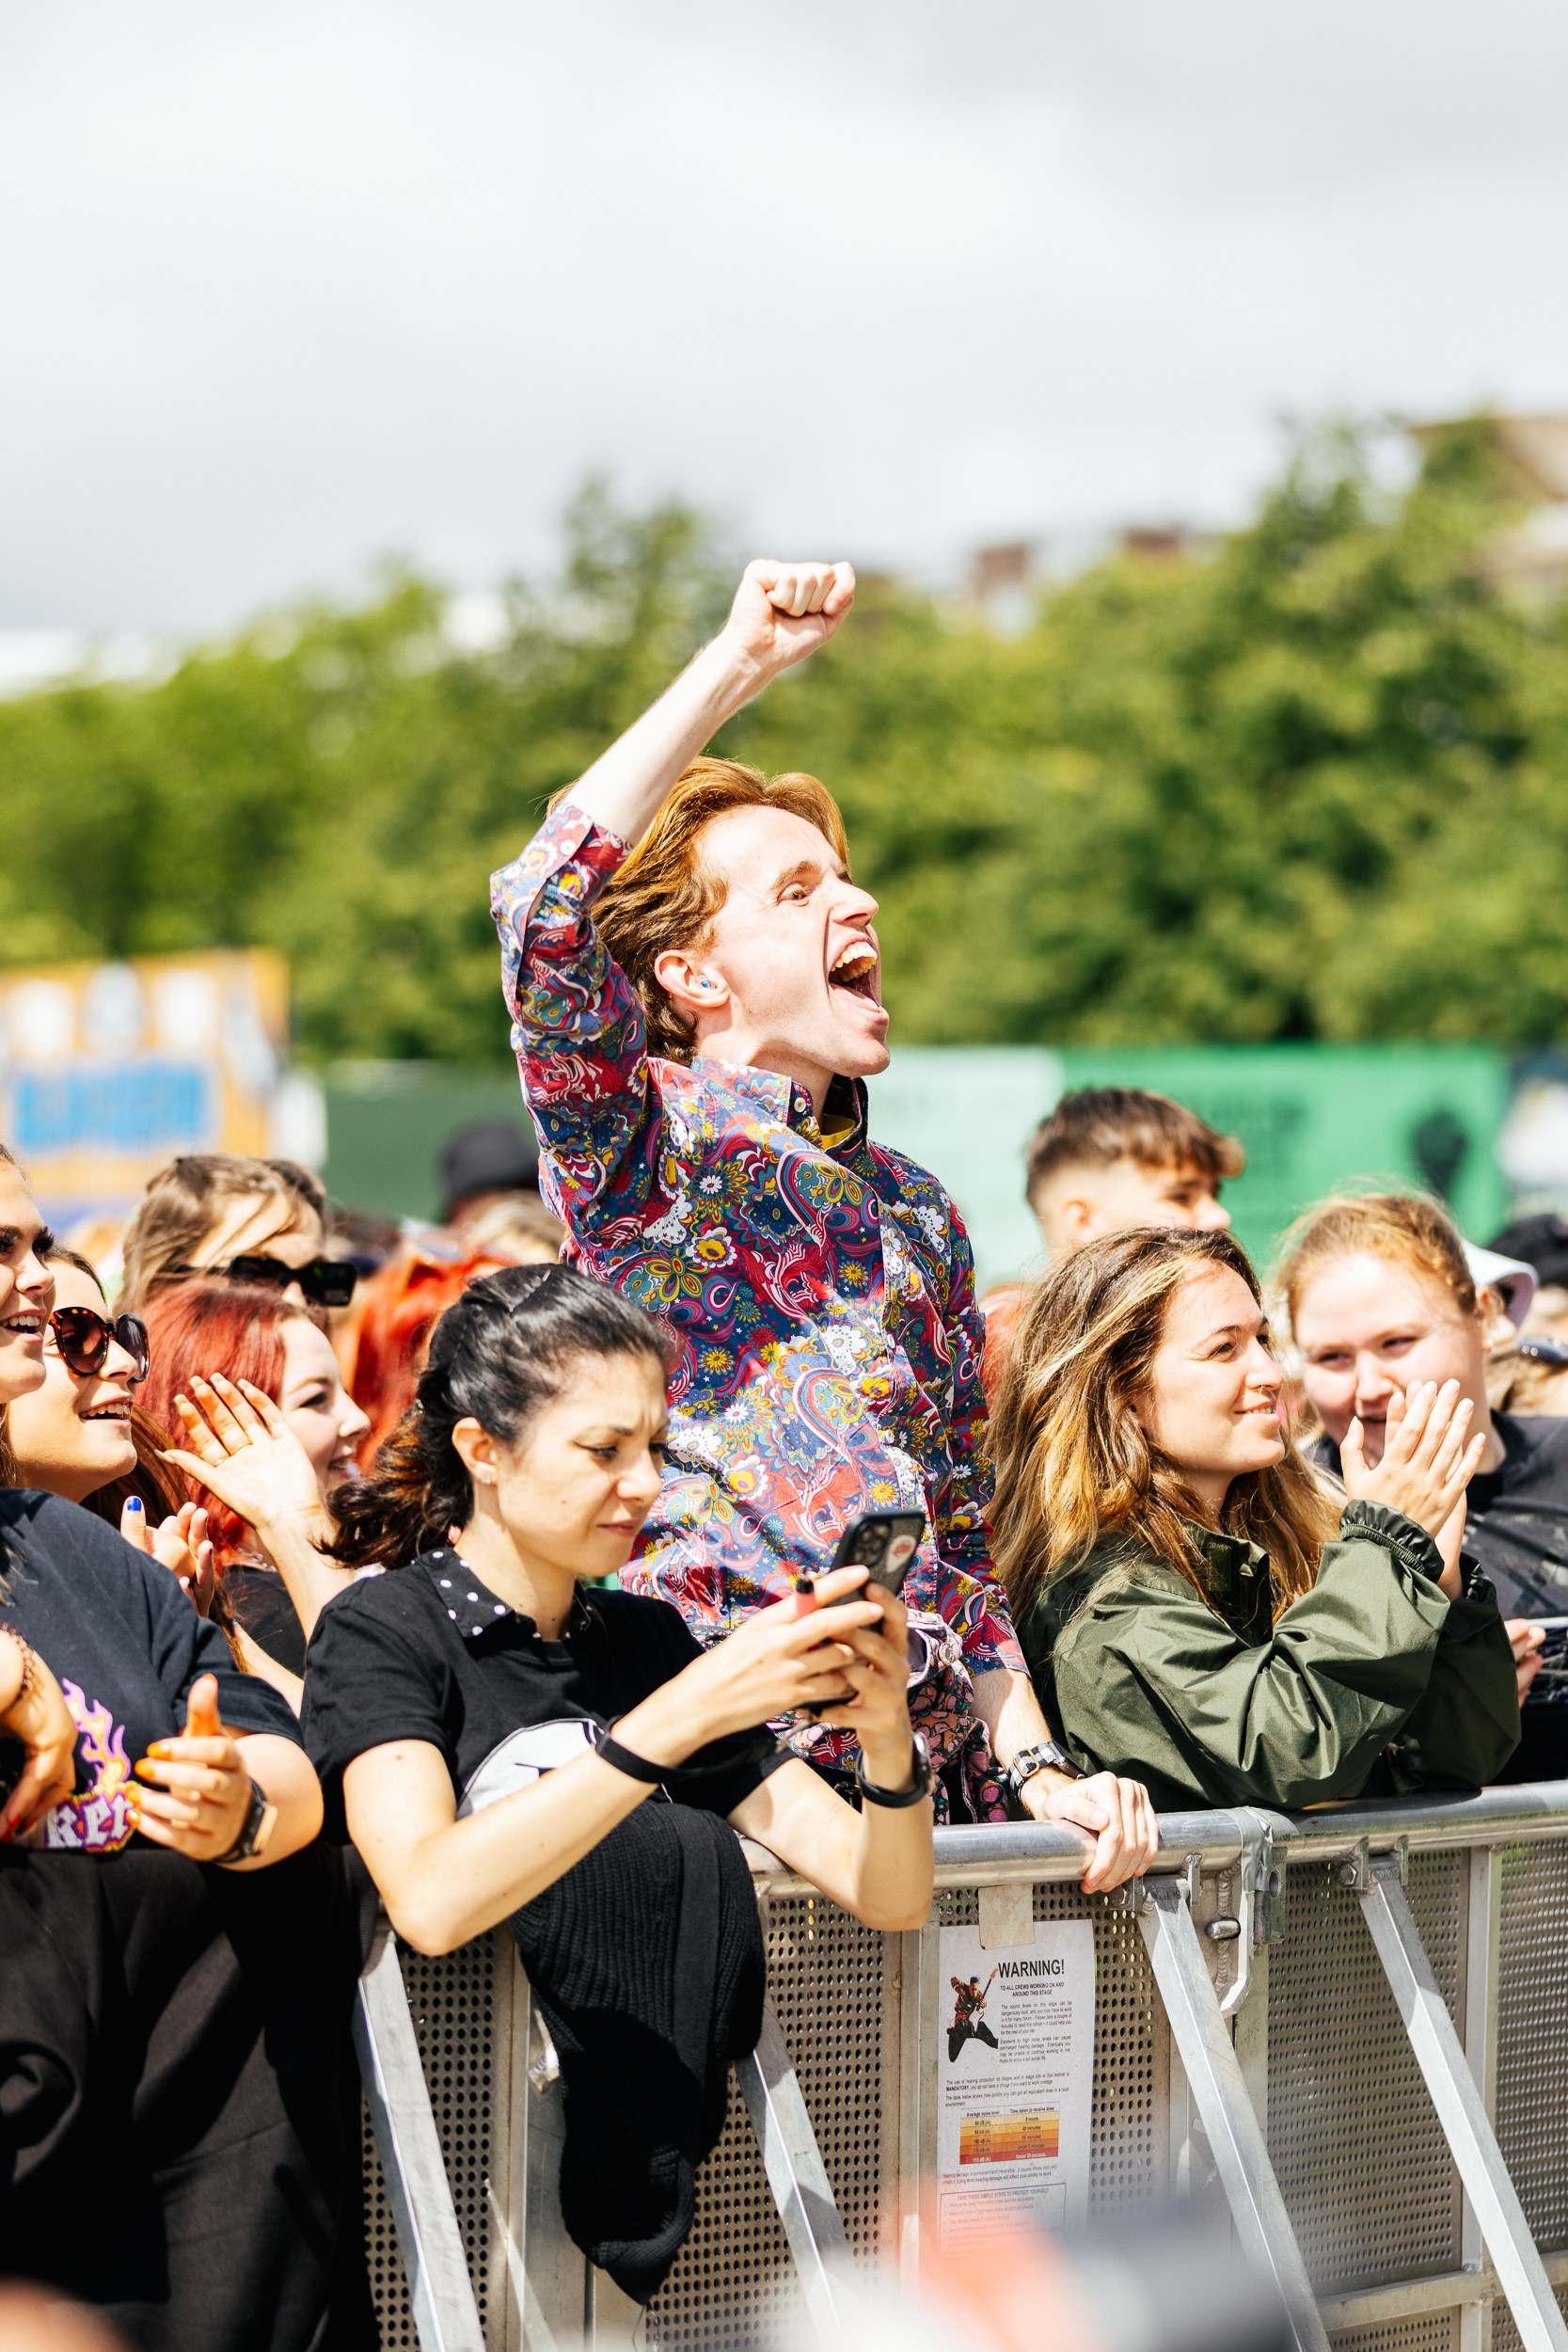 Fans packed out Glasgow Green for the first day of the festival. (Image: TRNSMT)